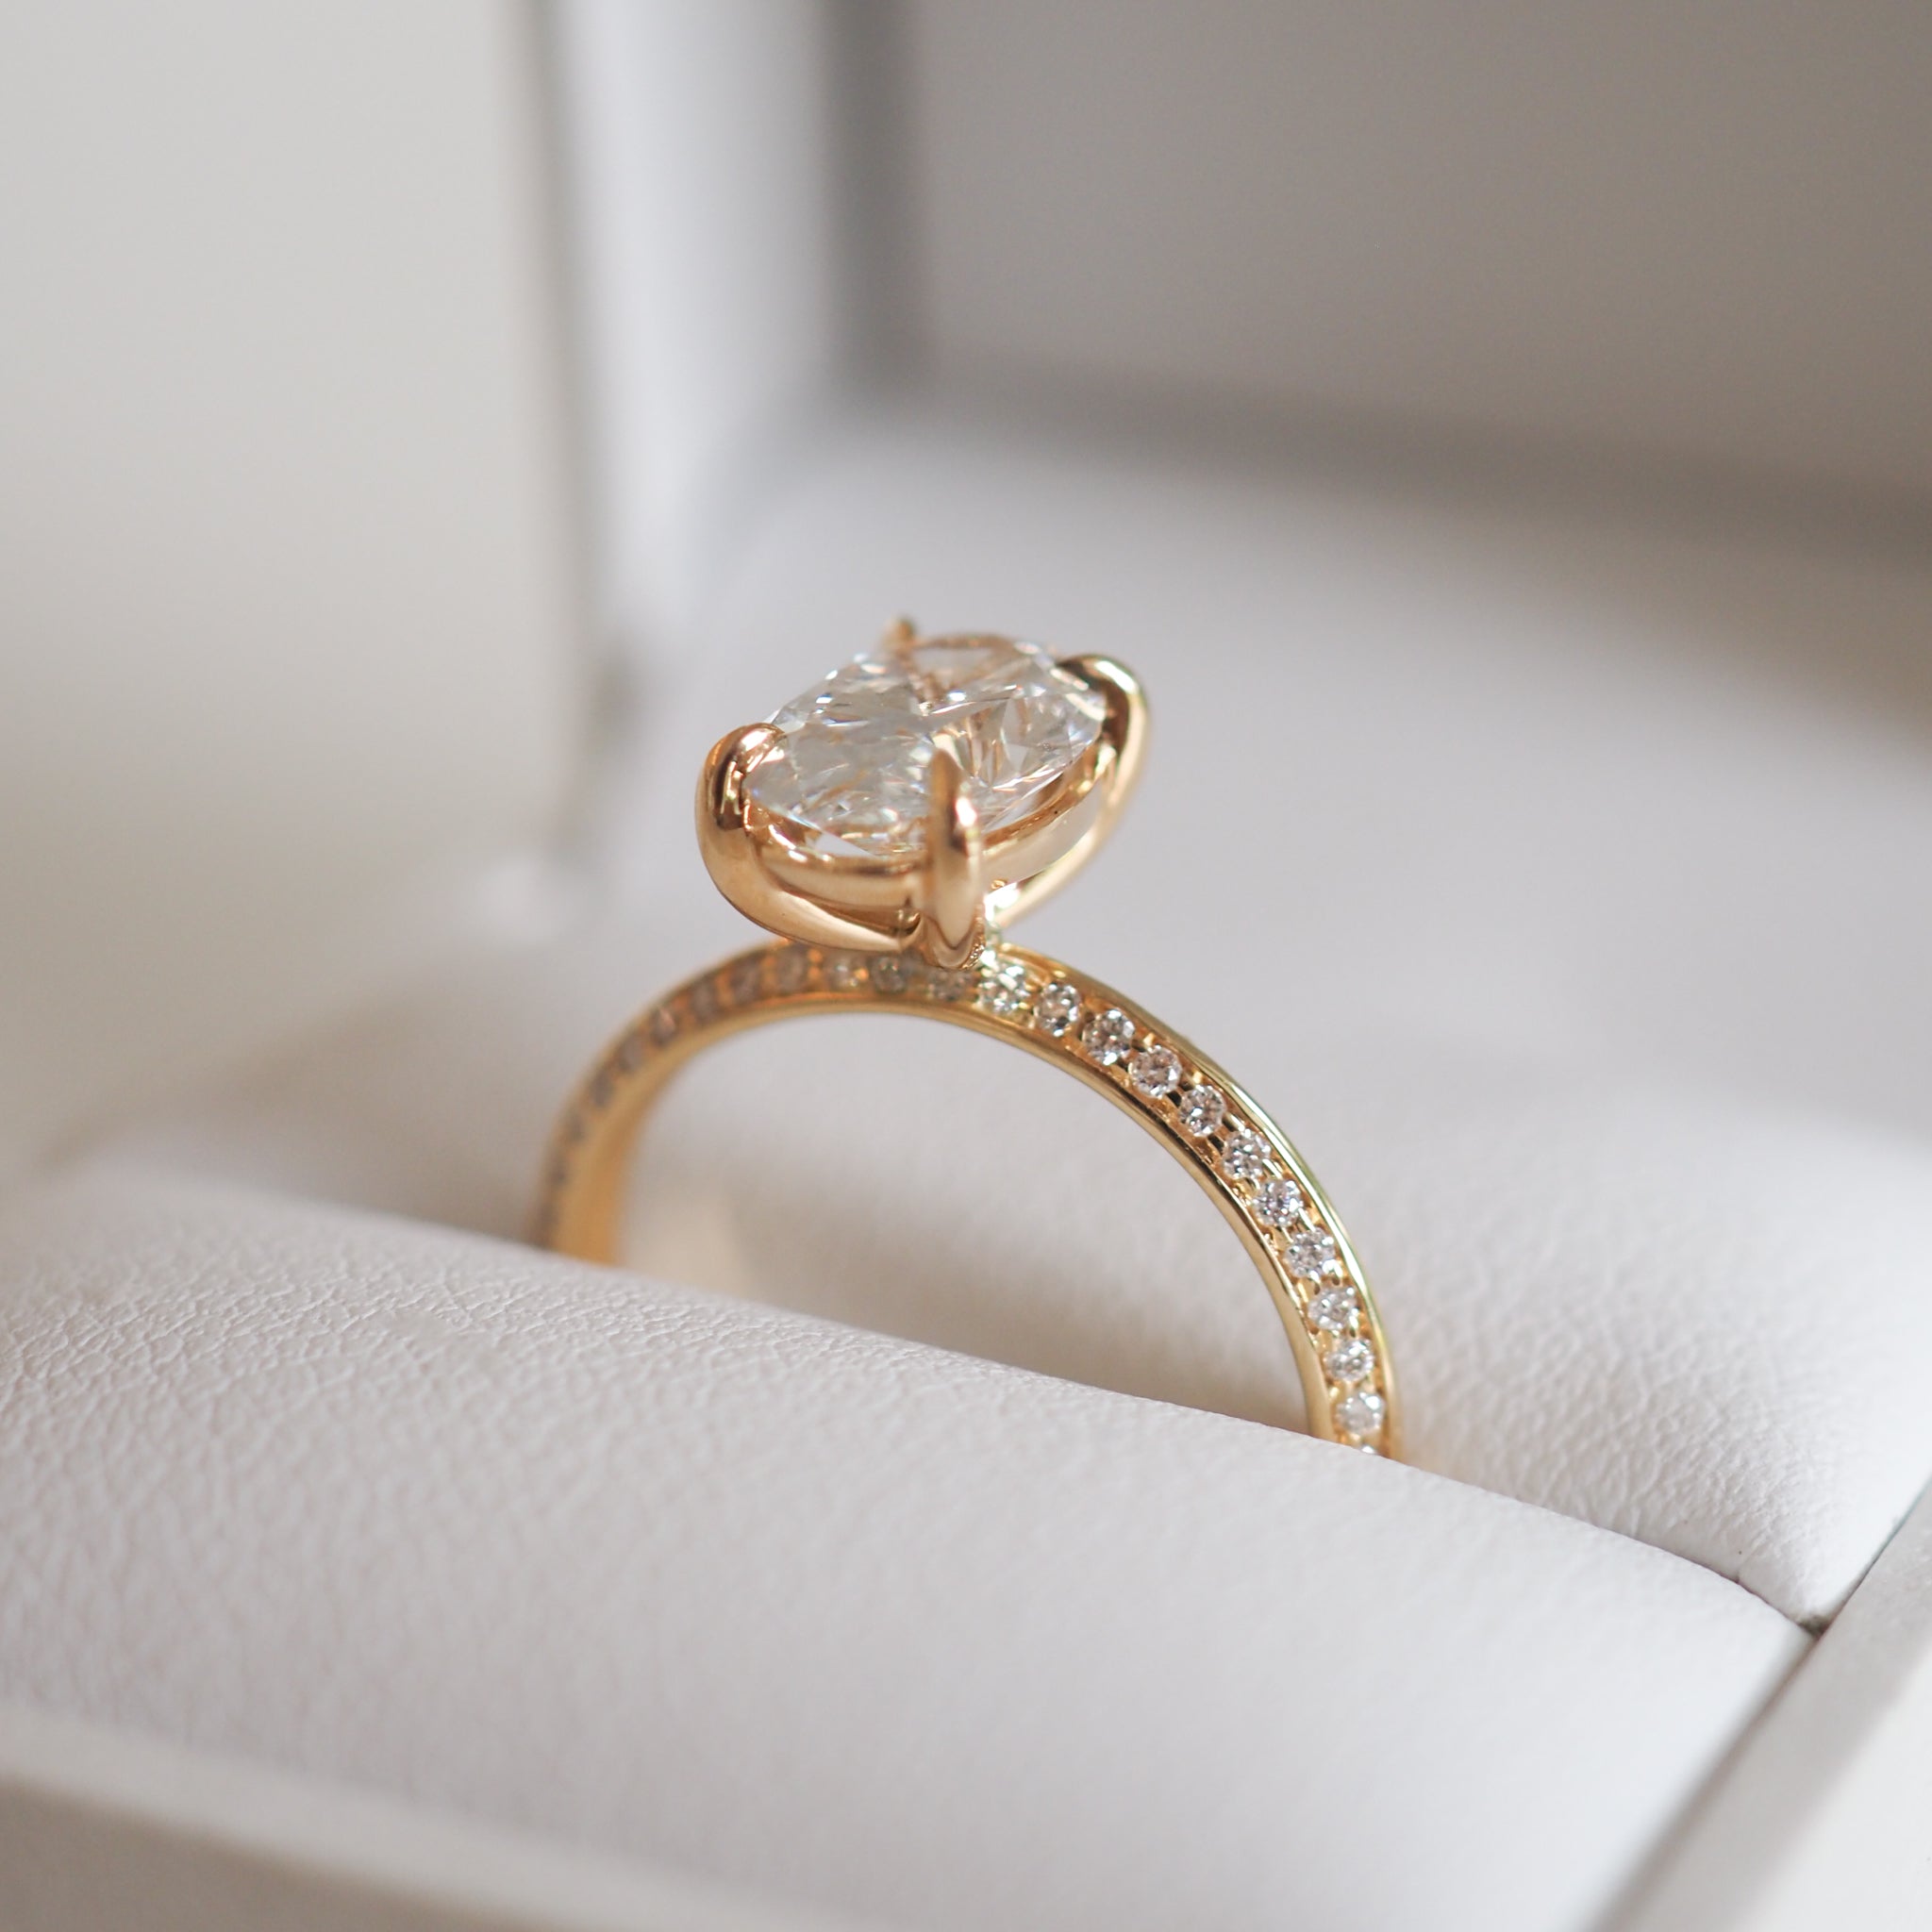 Clara | 1.53ct Oval Diamond Engagement Ring Ready To Wear